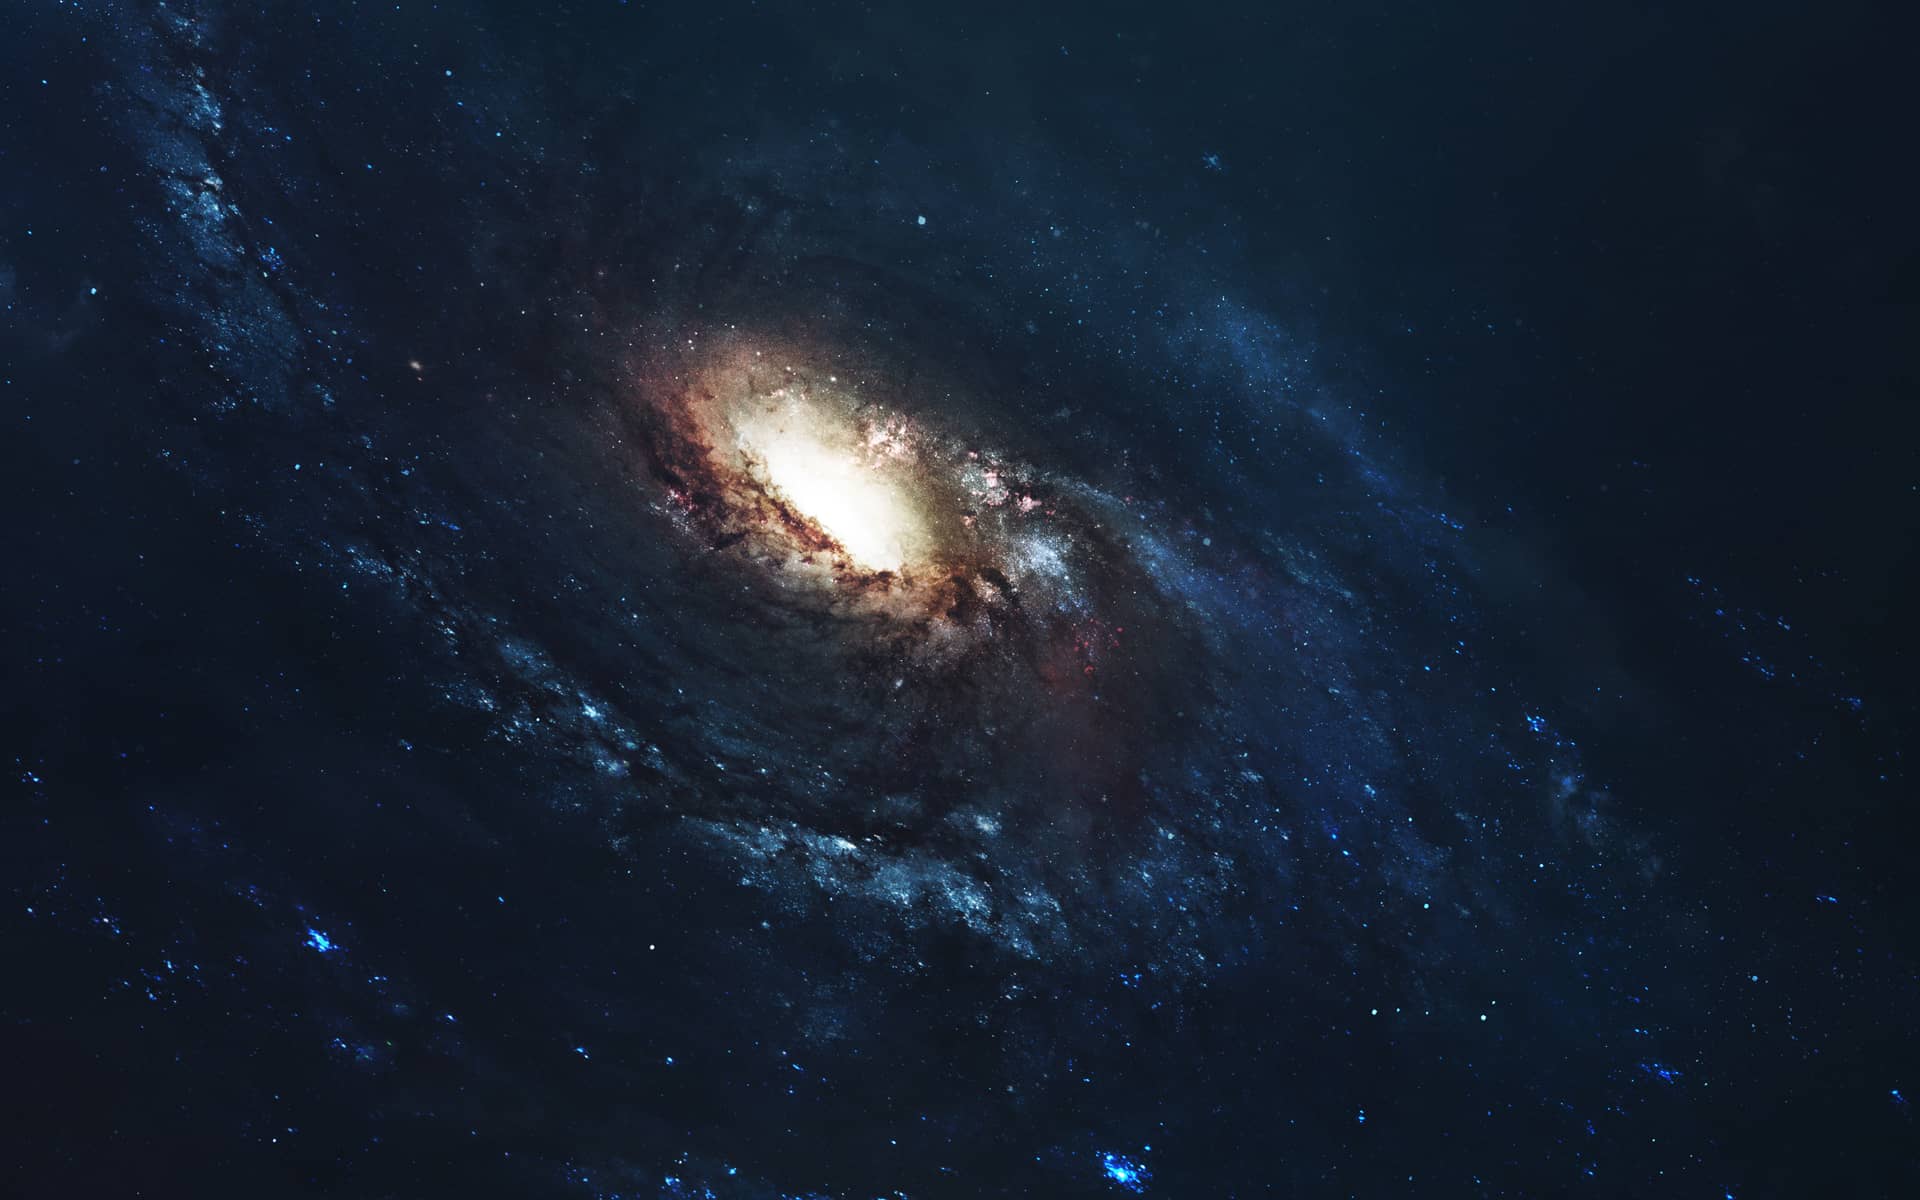 Spiral galaxy deep space beauty endless cosmos science fiction wallpaper